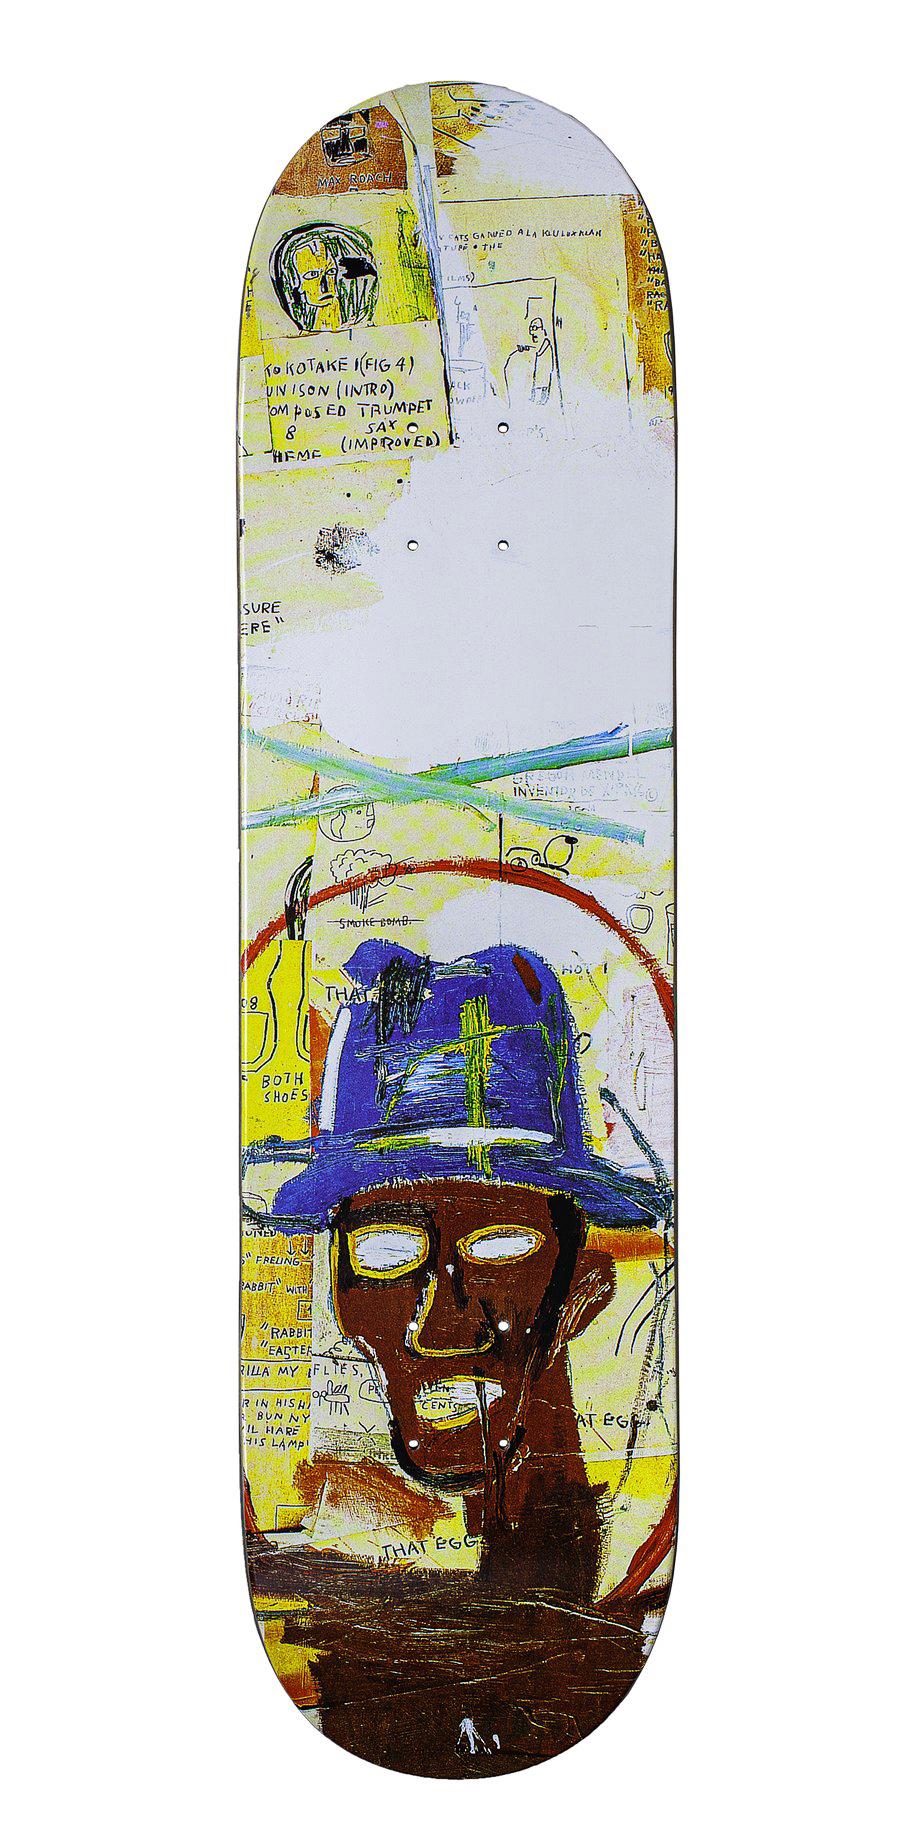 Basquiat Skateboard Deck (Basquiat Toxic):
Vibrant, superbly rendered Basquiat Skateboard Deck licensed by the Estate of Jean Michel Basquiat in conjunction with Artestar, featuring a reproduction of the much iconic 1984 work, Basquiat,